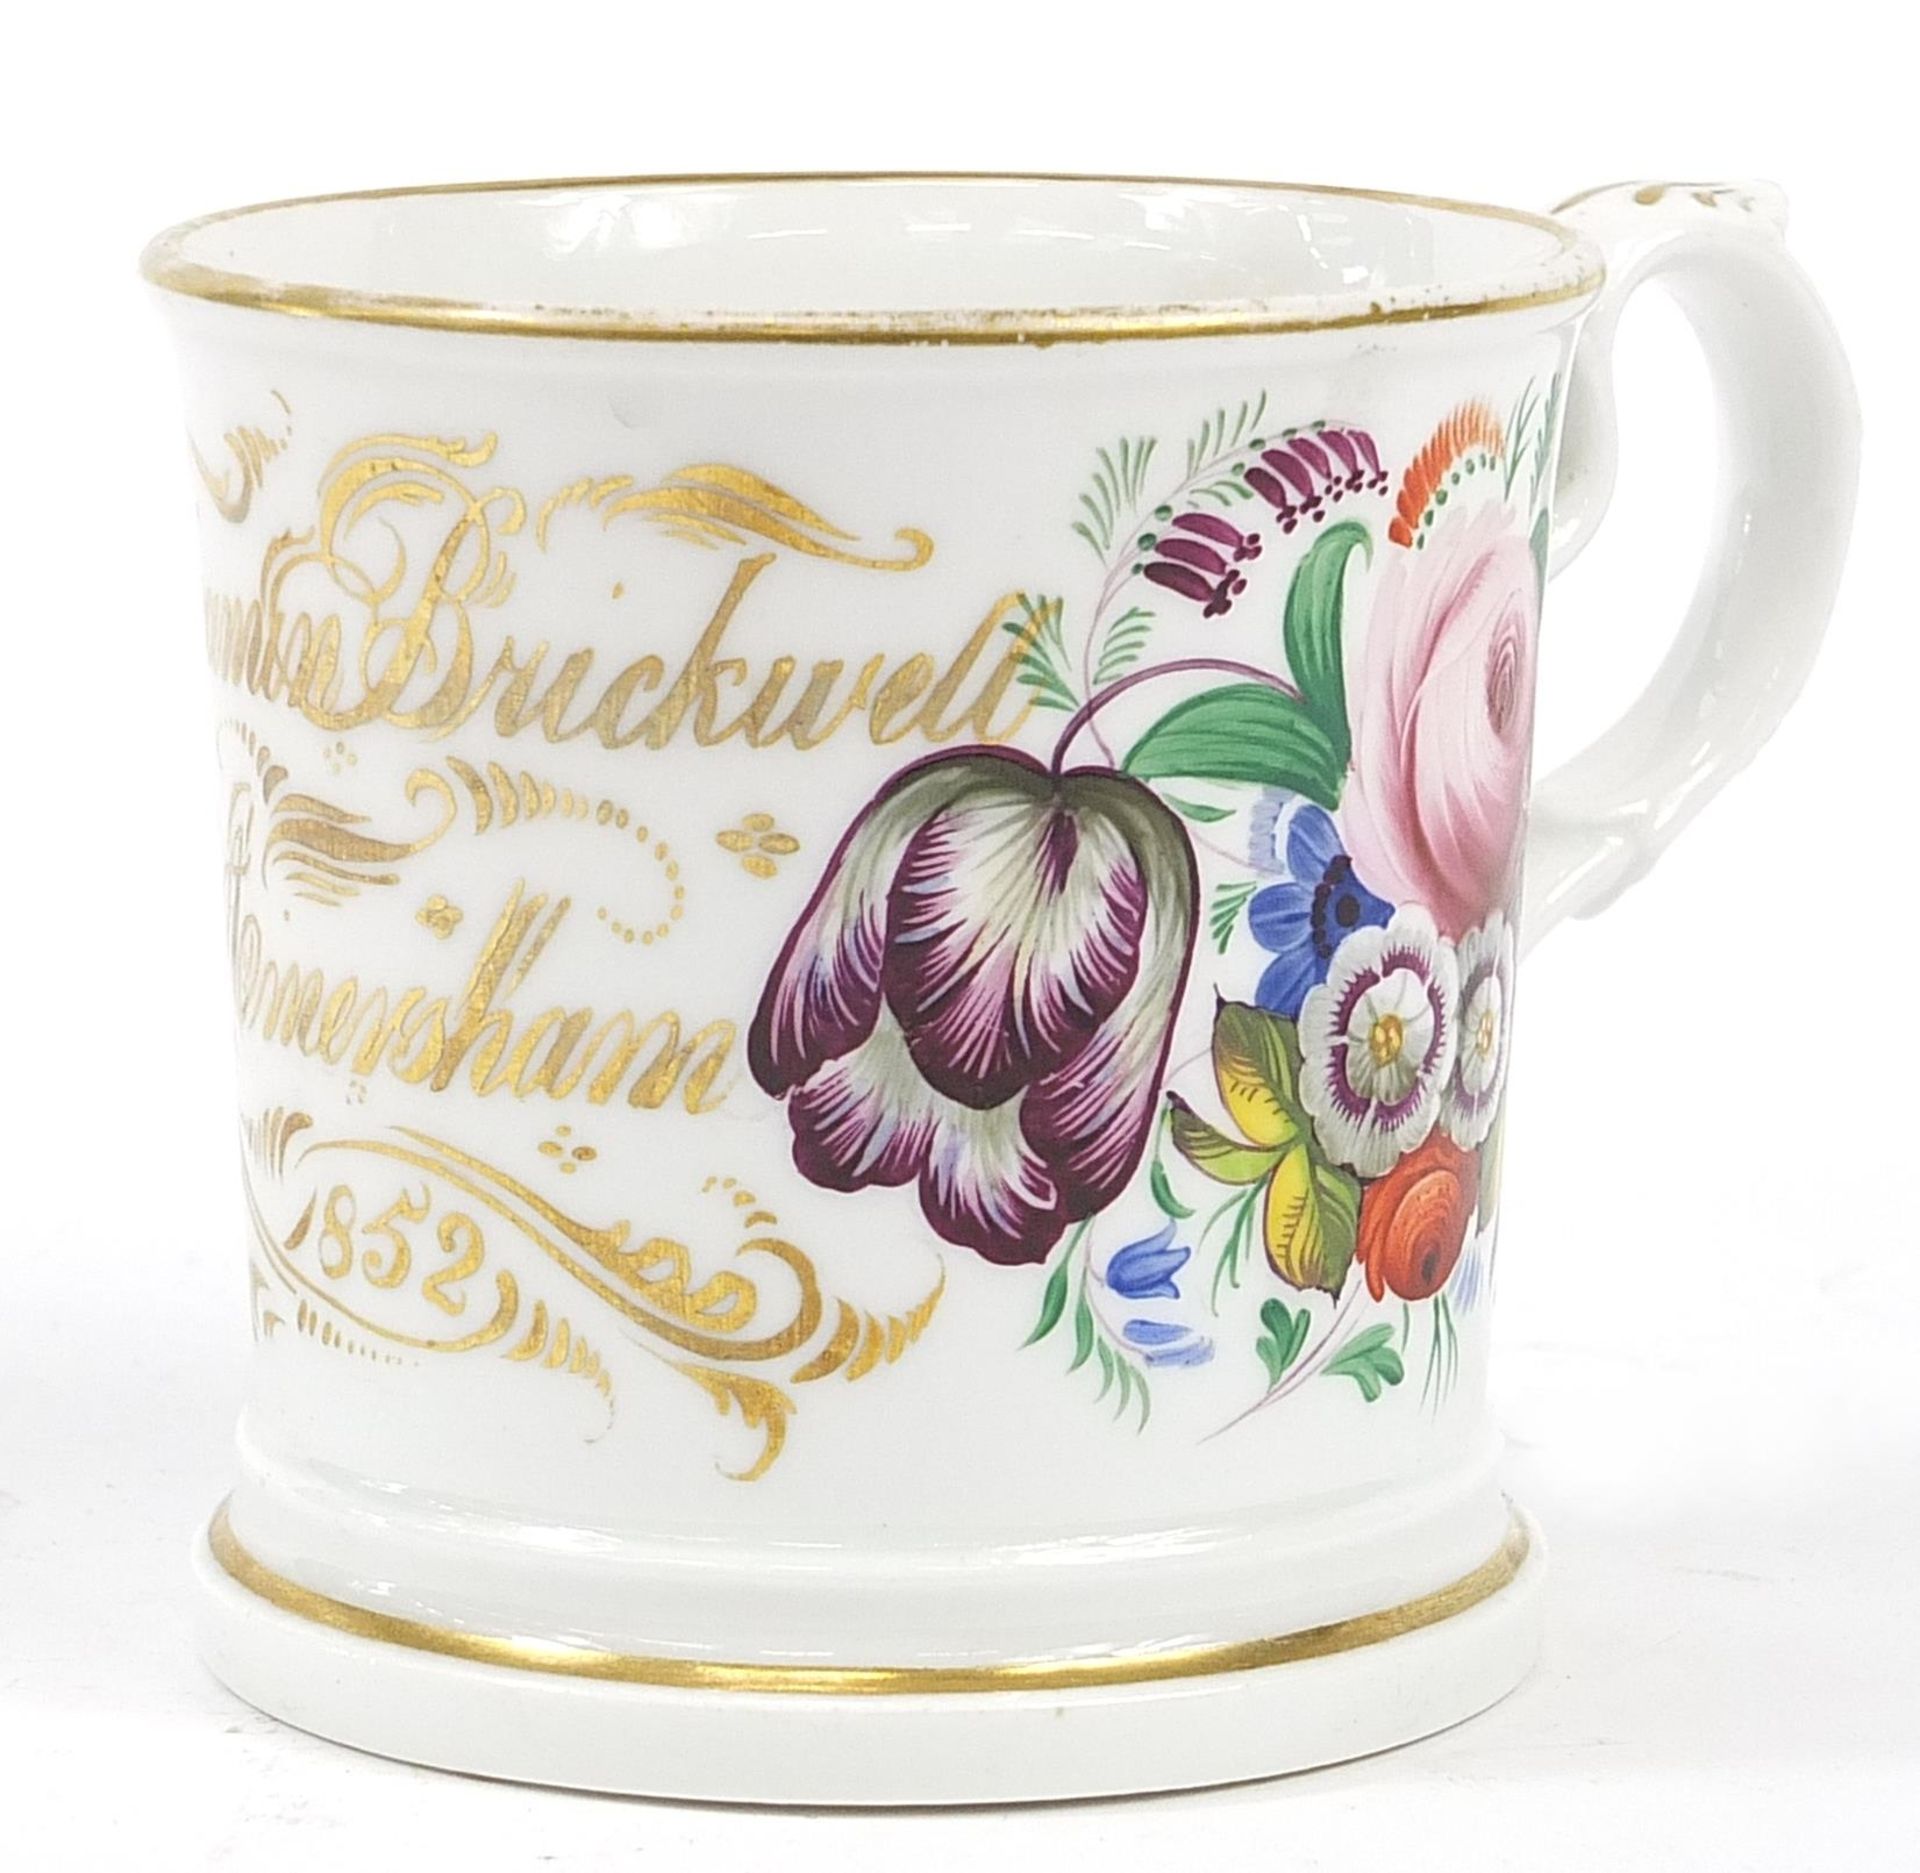 Mid 19th century porcelain mug hand painted with flowers, inscribed Benjamin Bruckwell Amersham